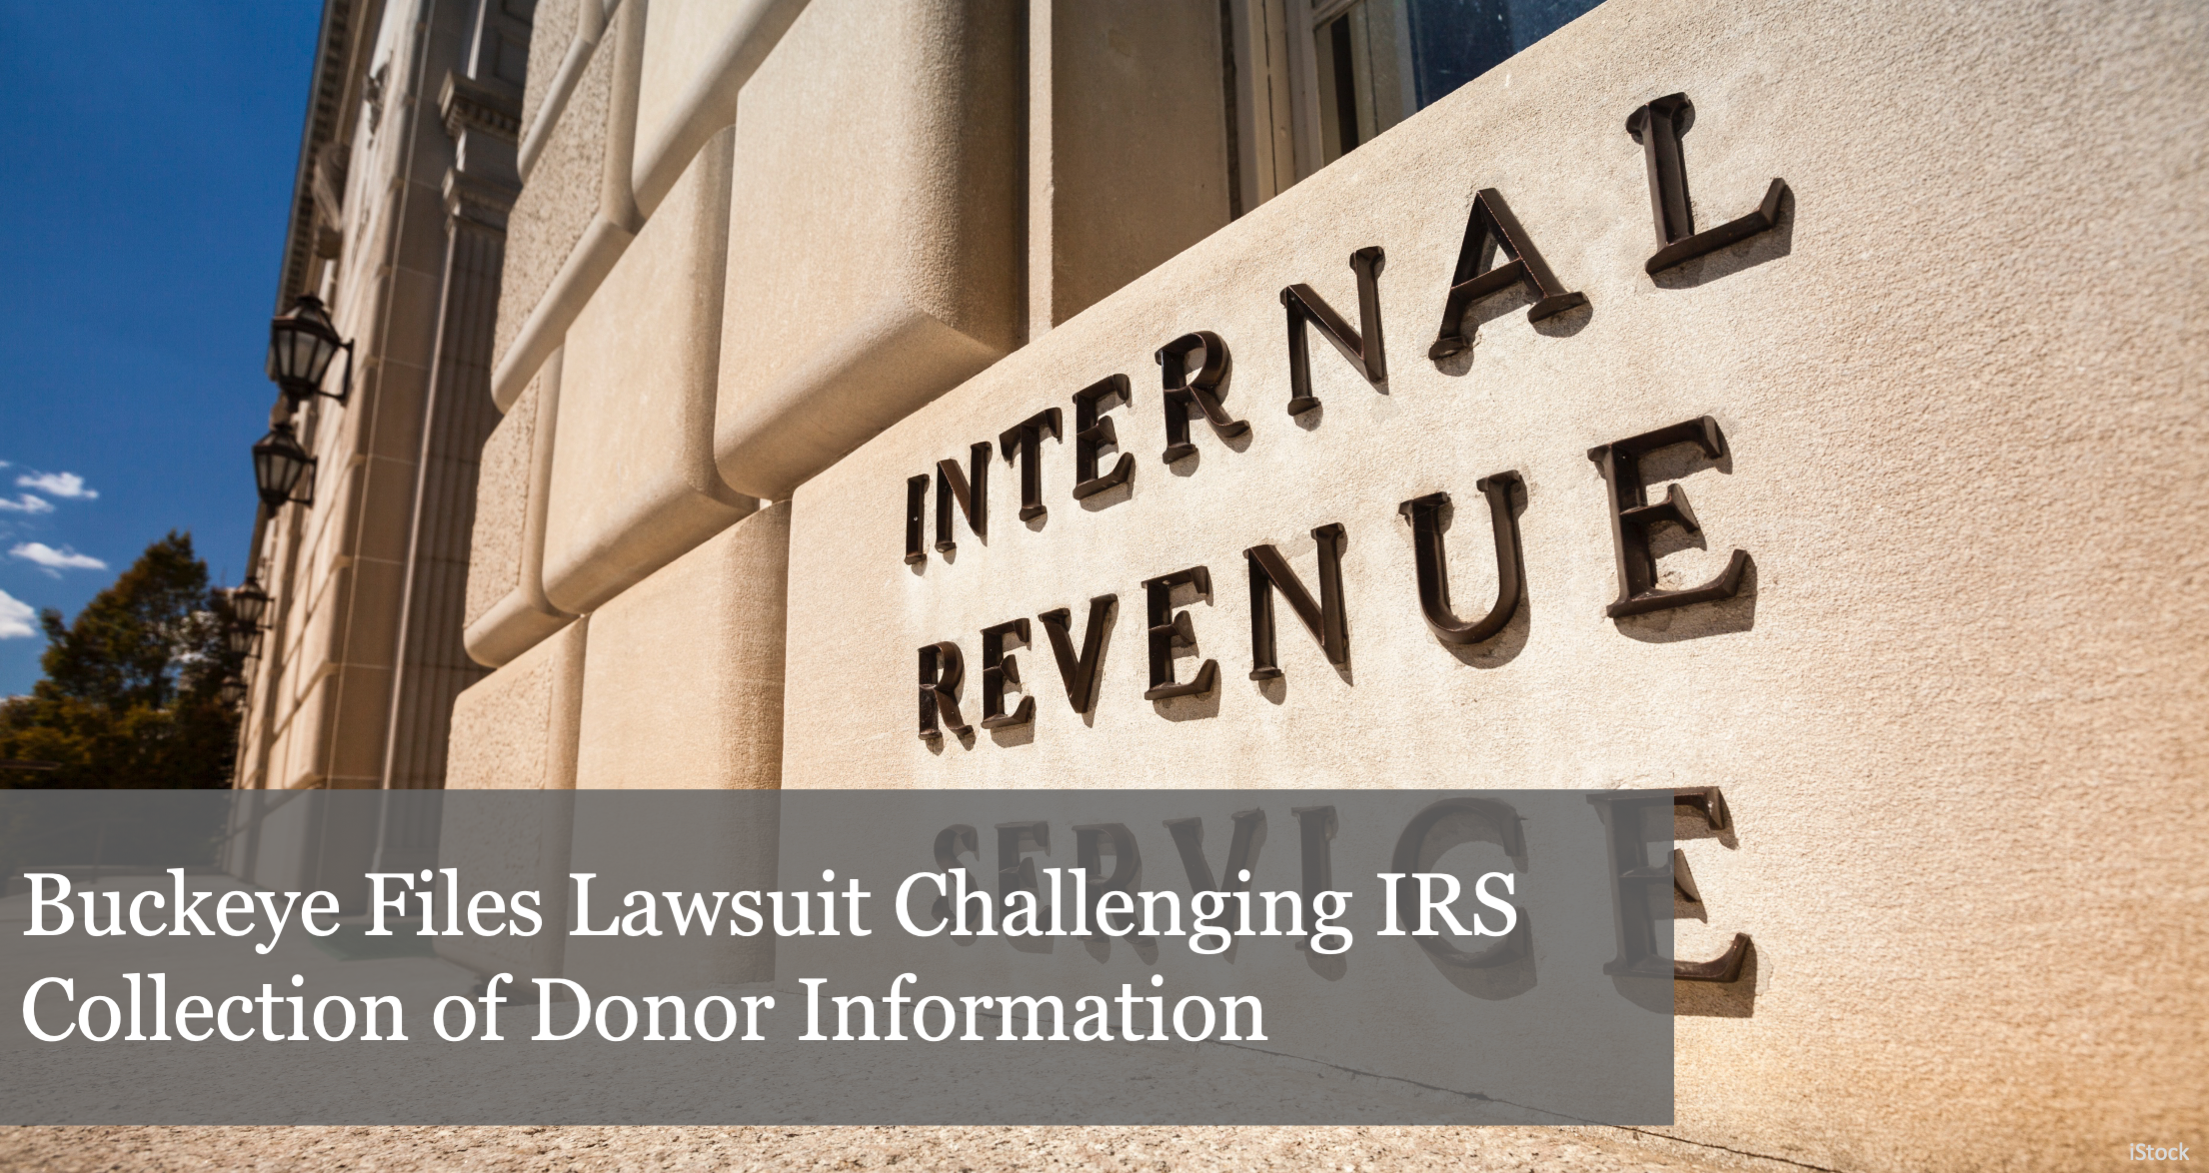 The Buckeye Institute Files Lawsuit Challenging IRS Collection of Donor Data